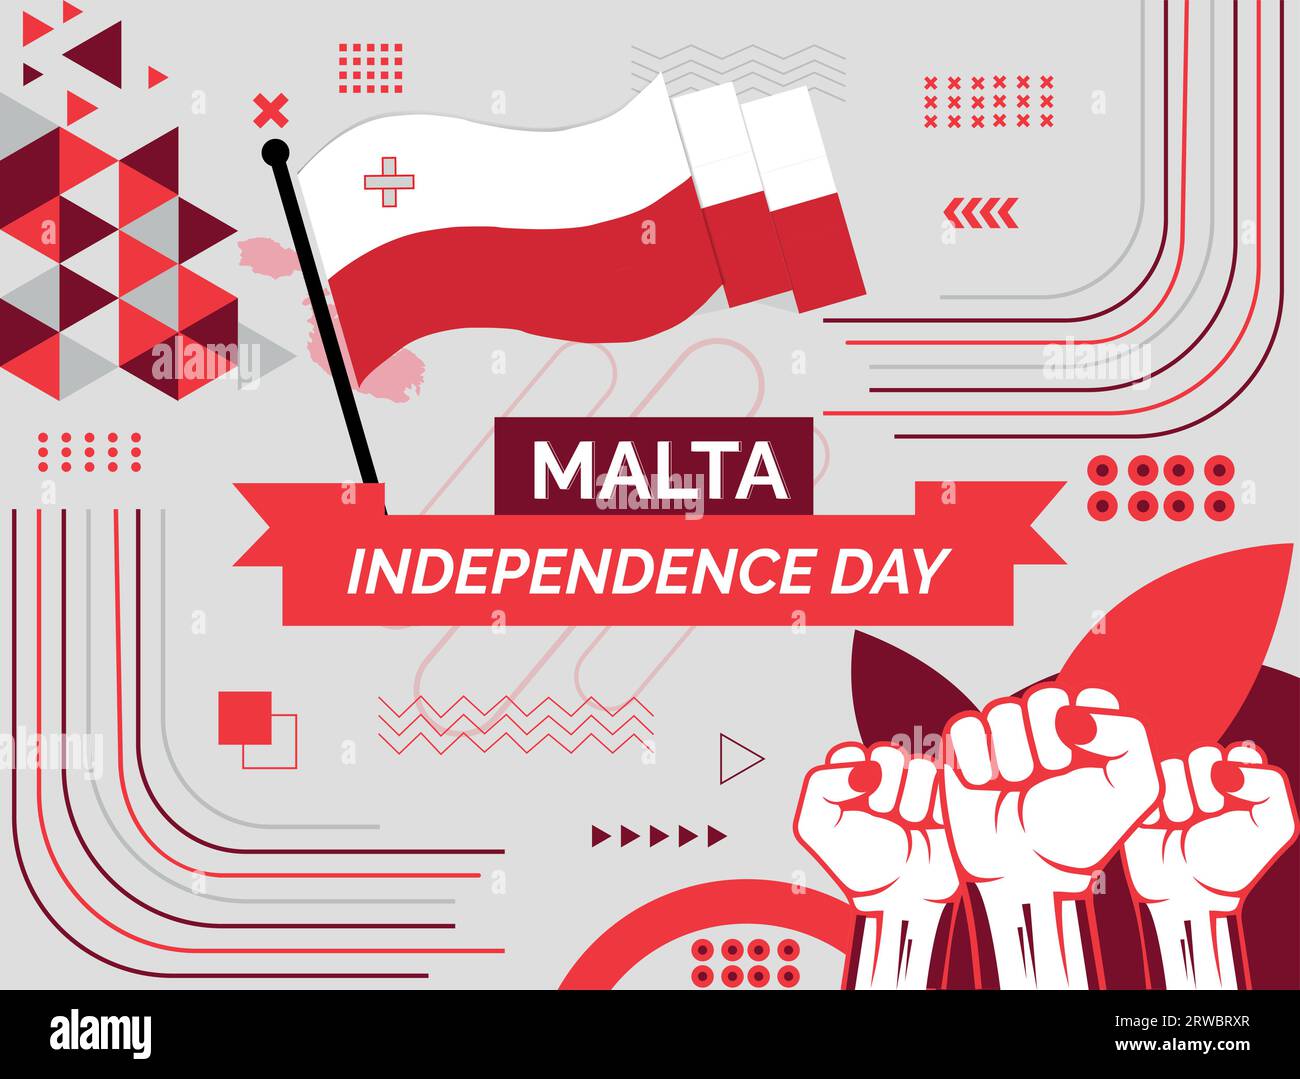 Malta Map and raised fists. National day or Independence day design for Malta celebration. Modern retro design with abstract icons. Vector Stock Vector